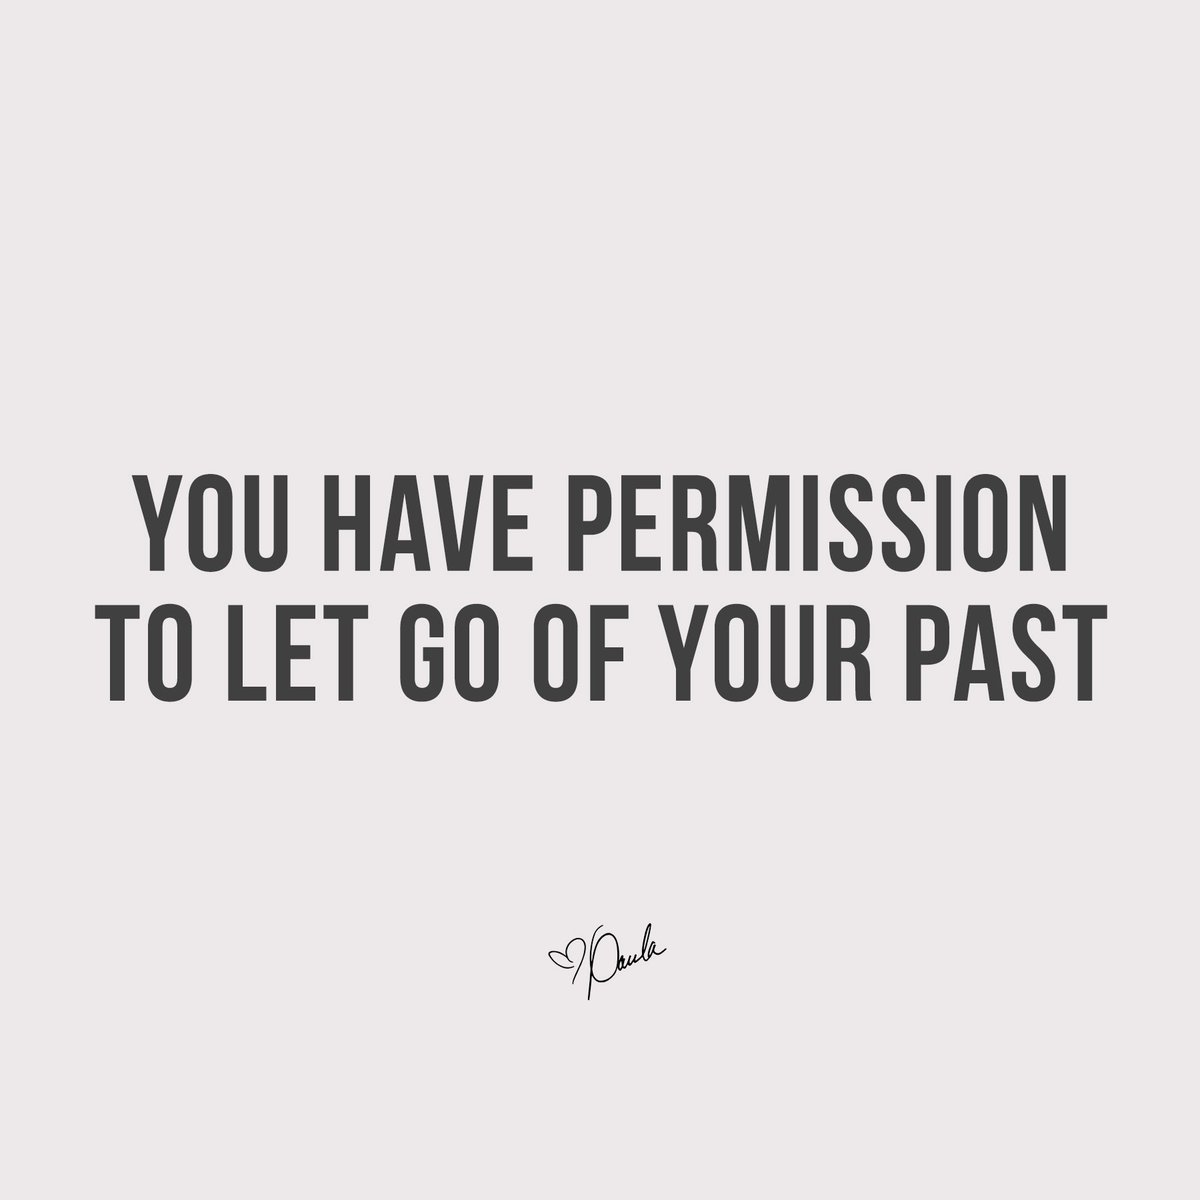 You have permission to let go of your past... God, please heal the hurt of aching hearts, bruised and broken souls by your love and goodness!